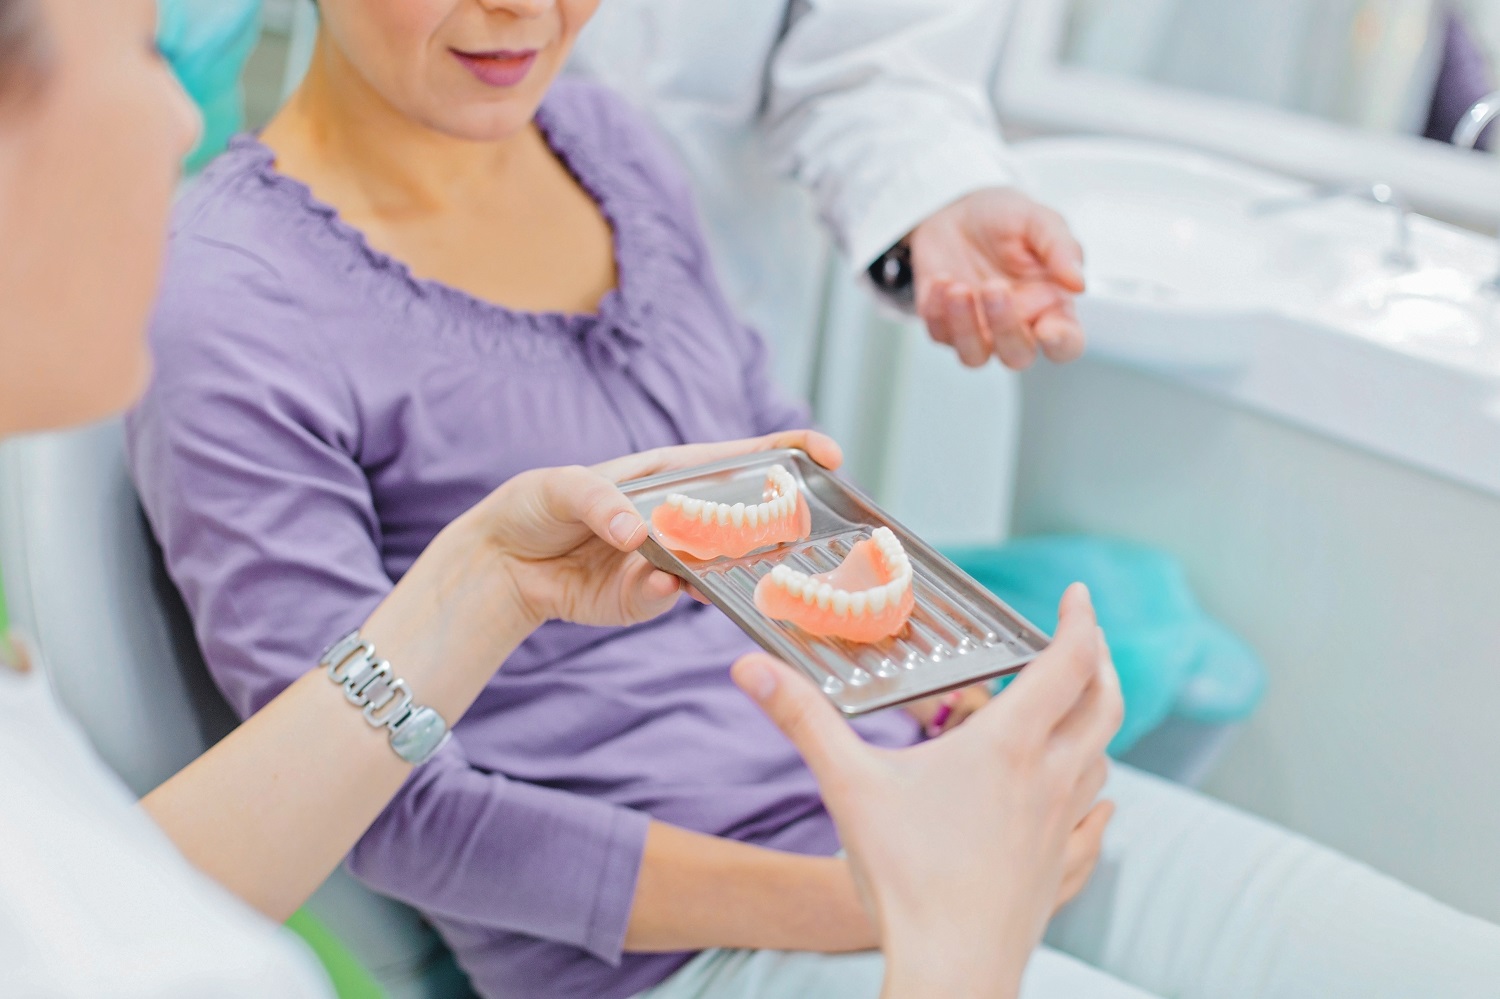 Dentist showing teeth dentures to a female patient